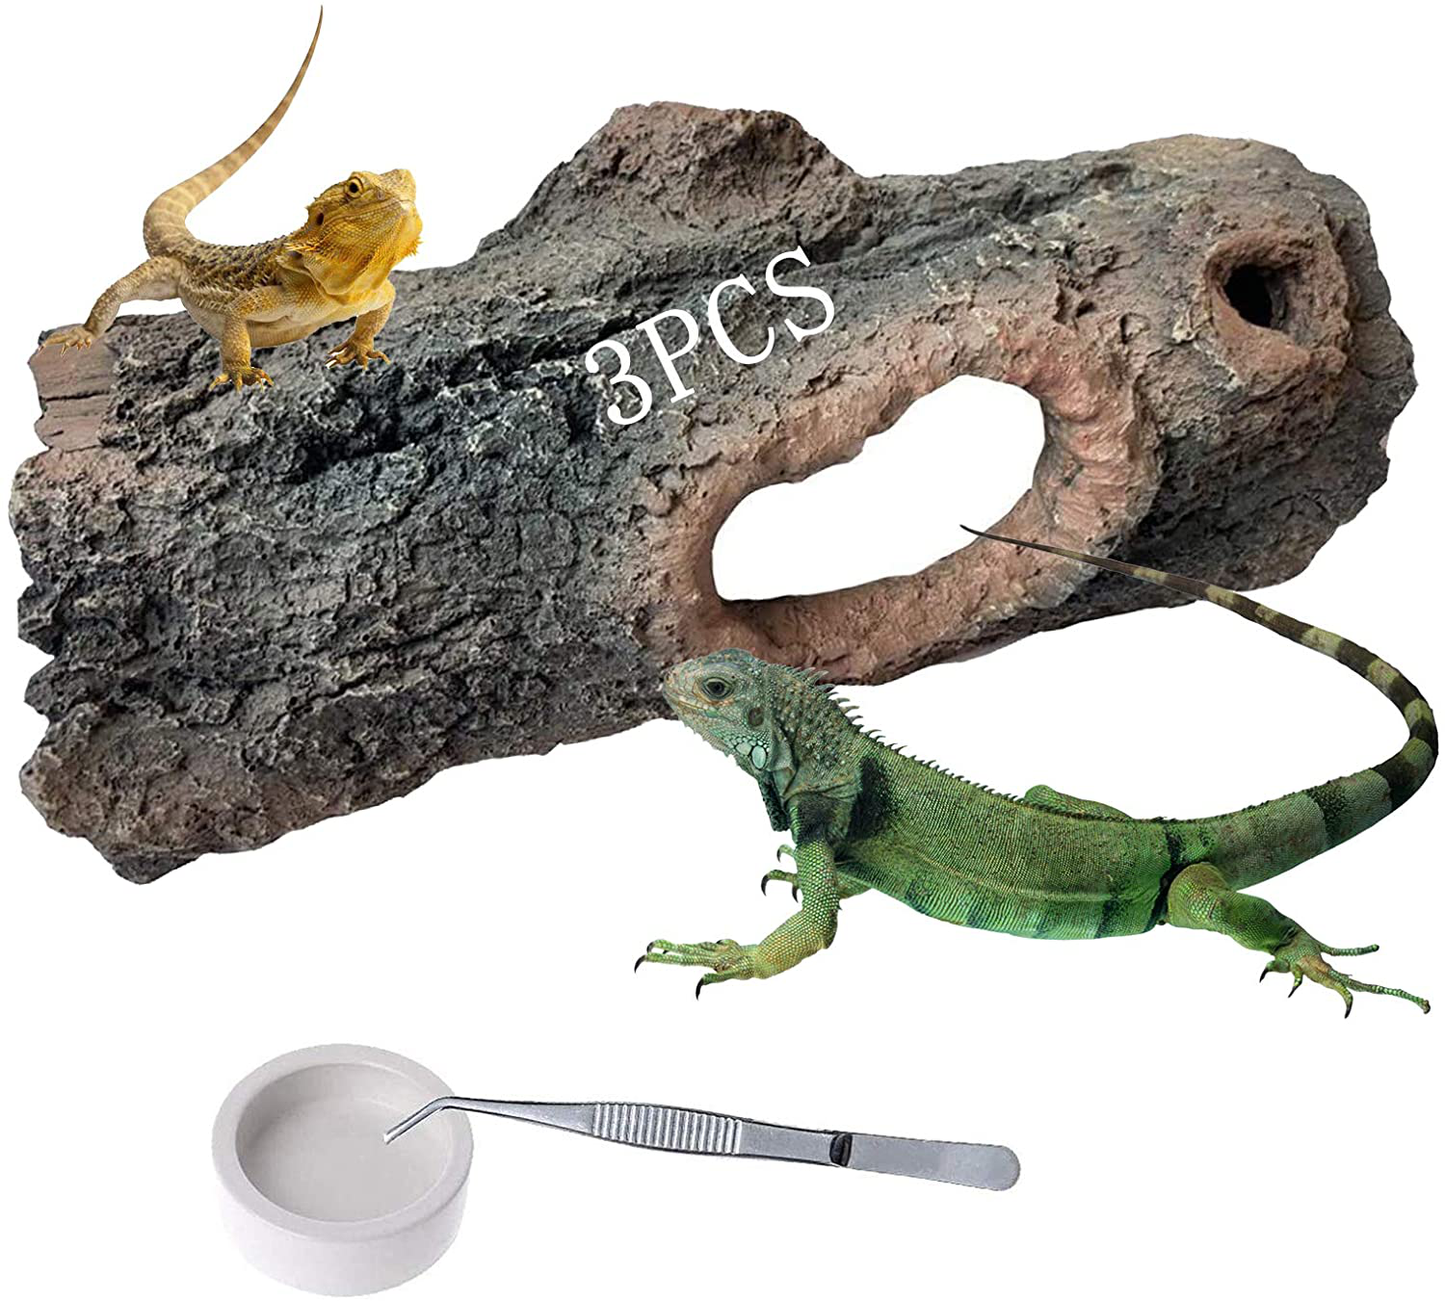 PINVNBY Large Reptile Hideout Cave Lizard Resin Hollow Tree Trunk Habitat Decoration Bark Bend Tank Decor Decaying Driftwood Hut Ornament Terrarium Accessories for Chameleon,Gecko and Hermit Crabs